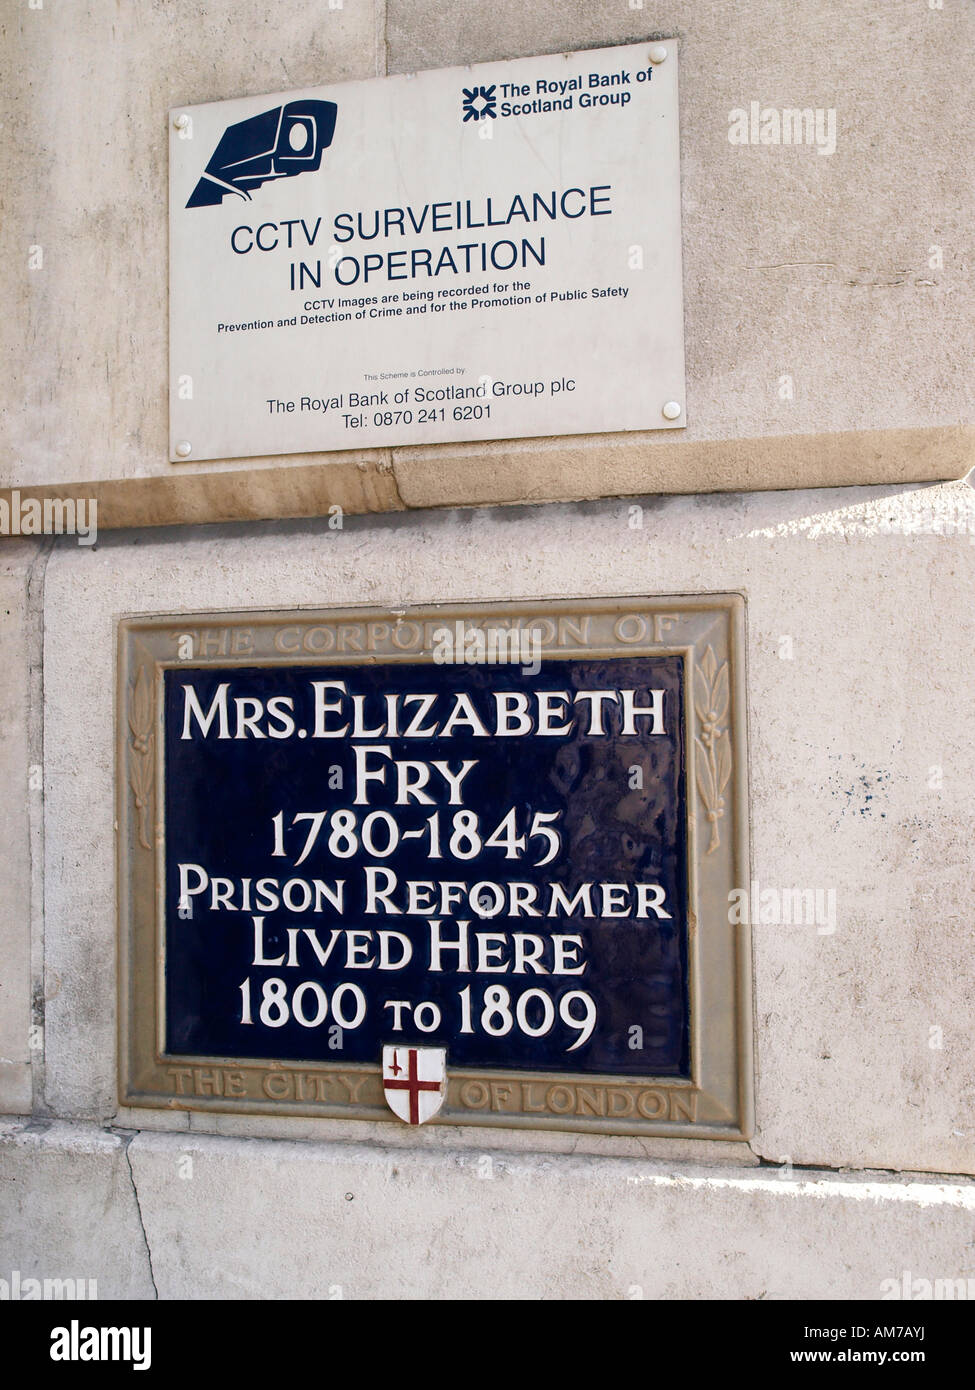 Blue Plaque dedicated to Mrs Elizabeth Gurney Fry By the Corporation of London for her work as a prison reformer. Stock Photo